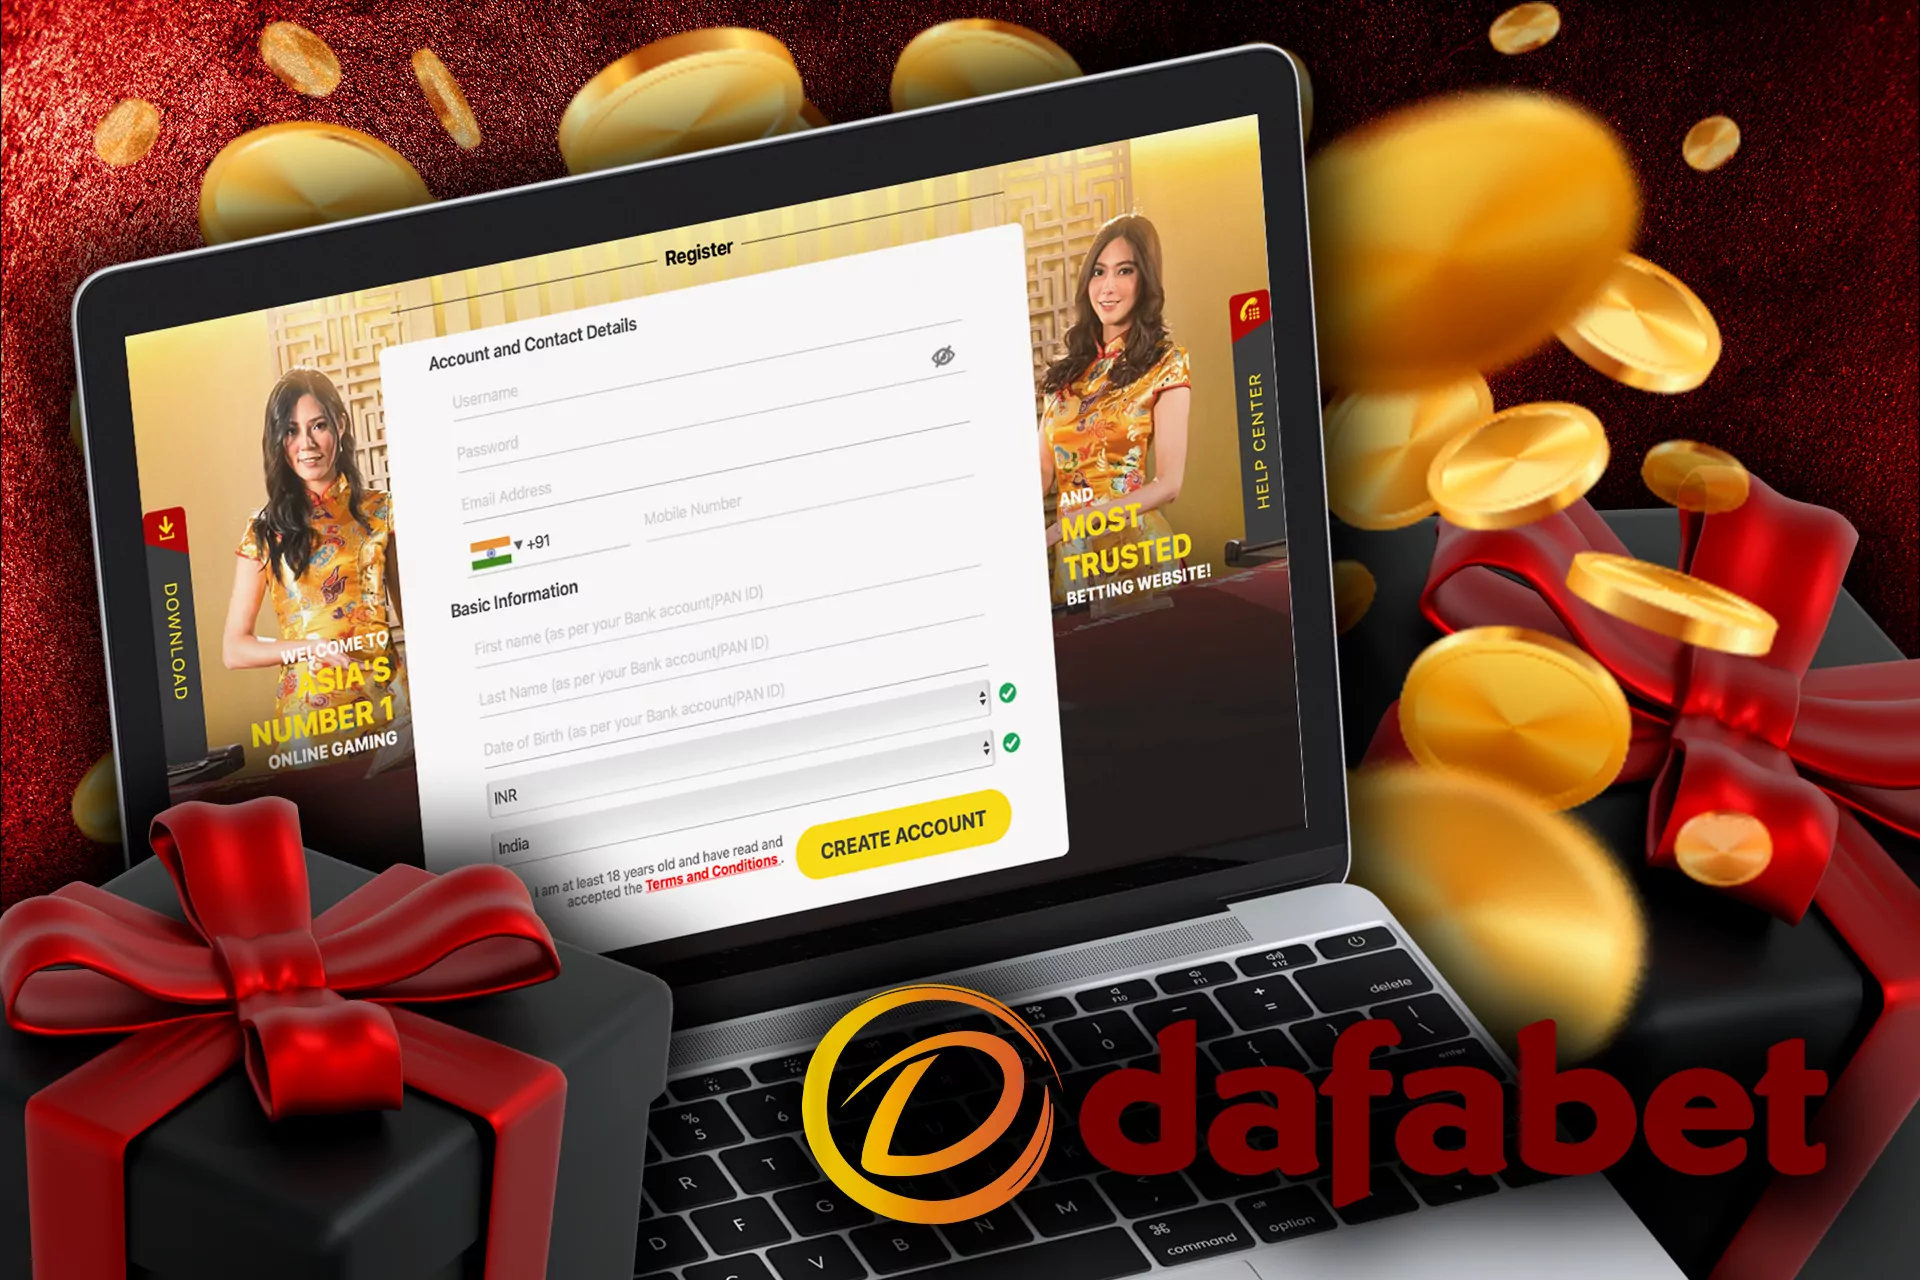 To get the welcome bonus from Dafabet, you need to create a new account.